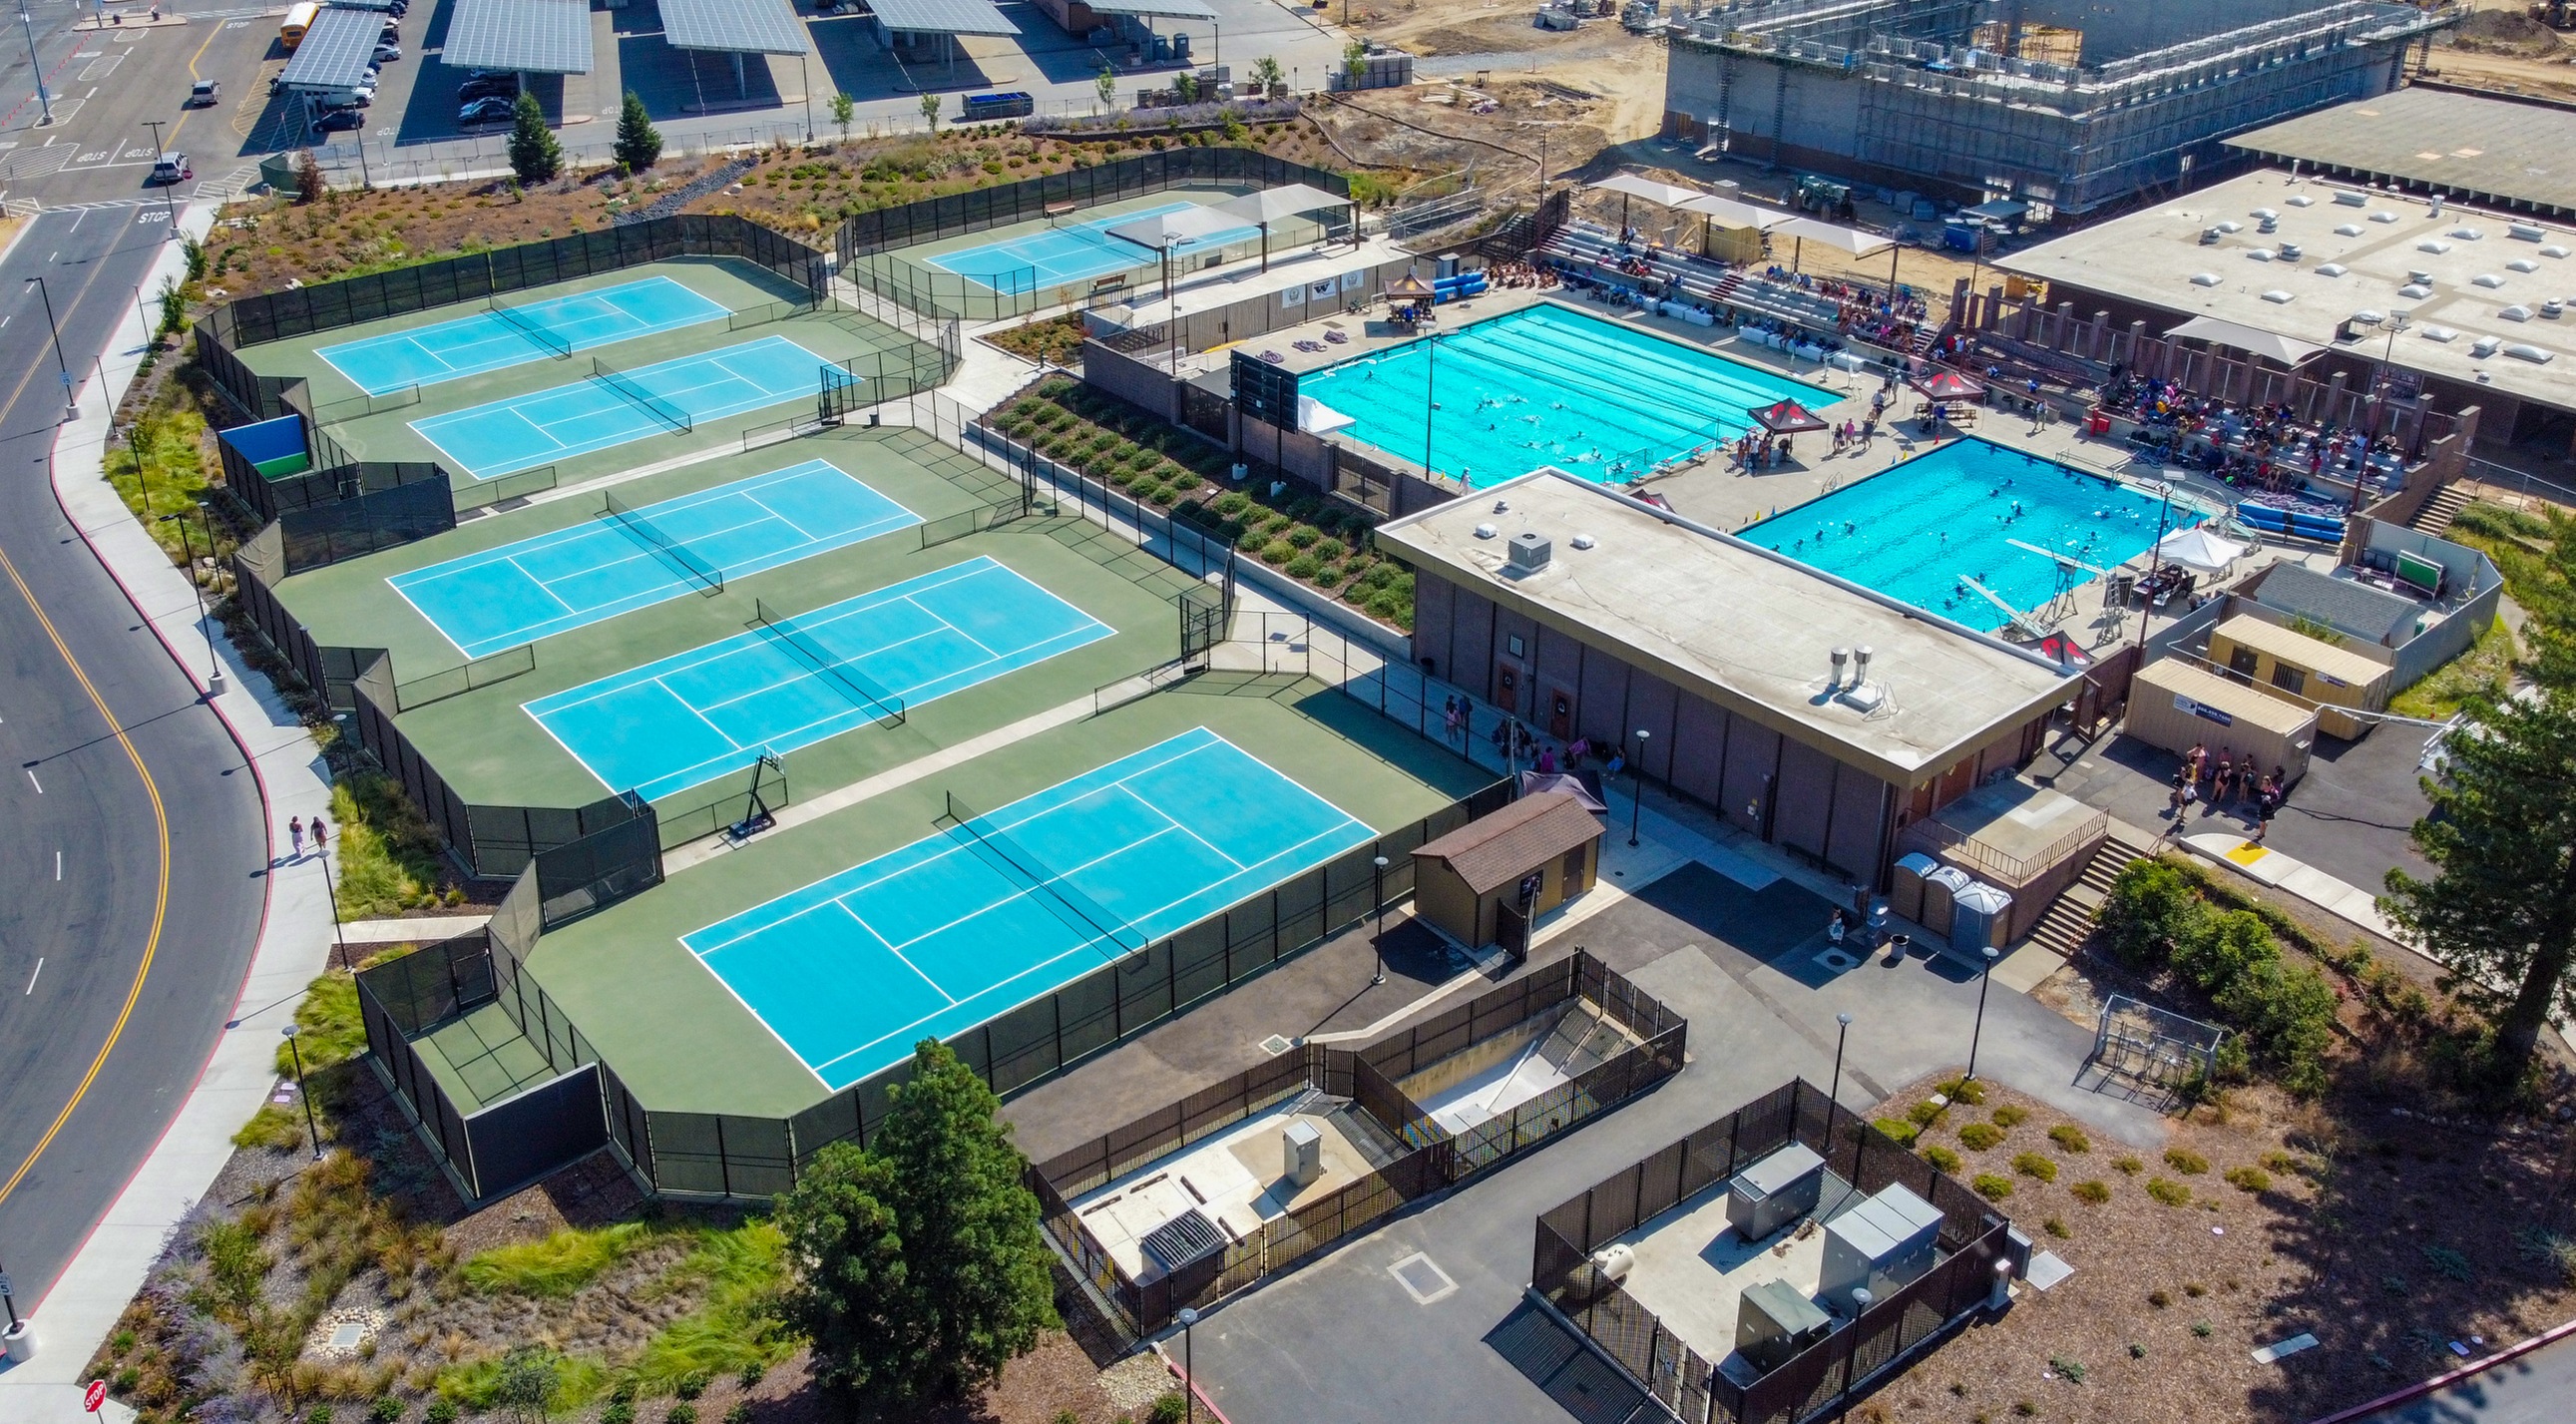 Image of 6 Sierra College tennis courts and 2 swimming pools